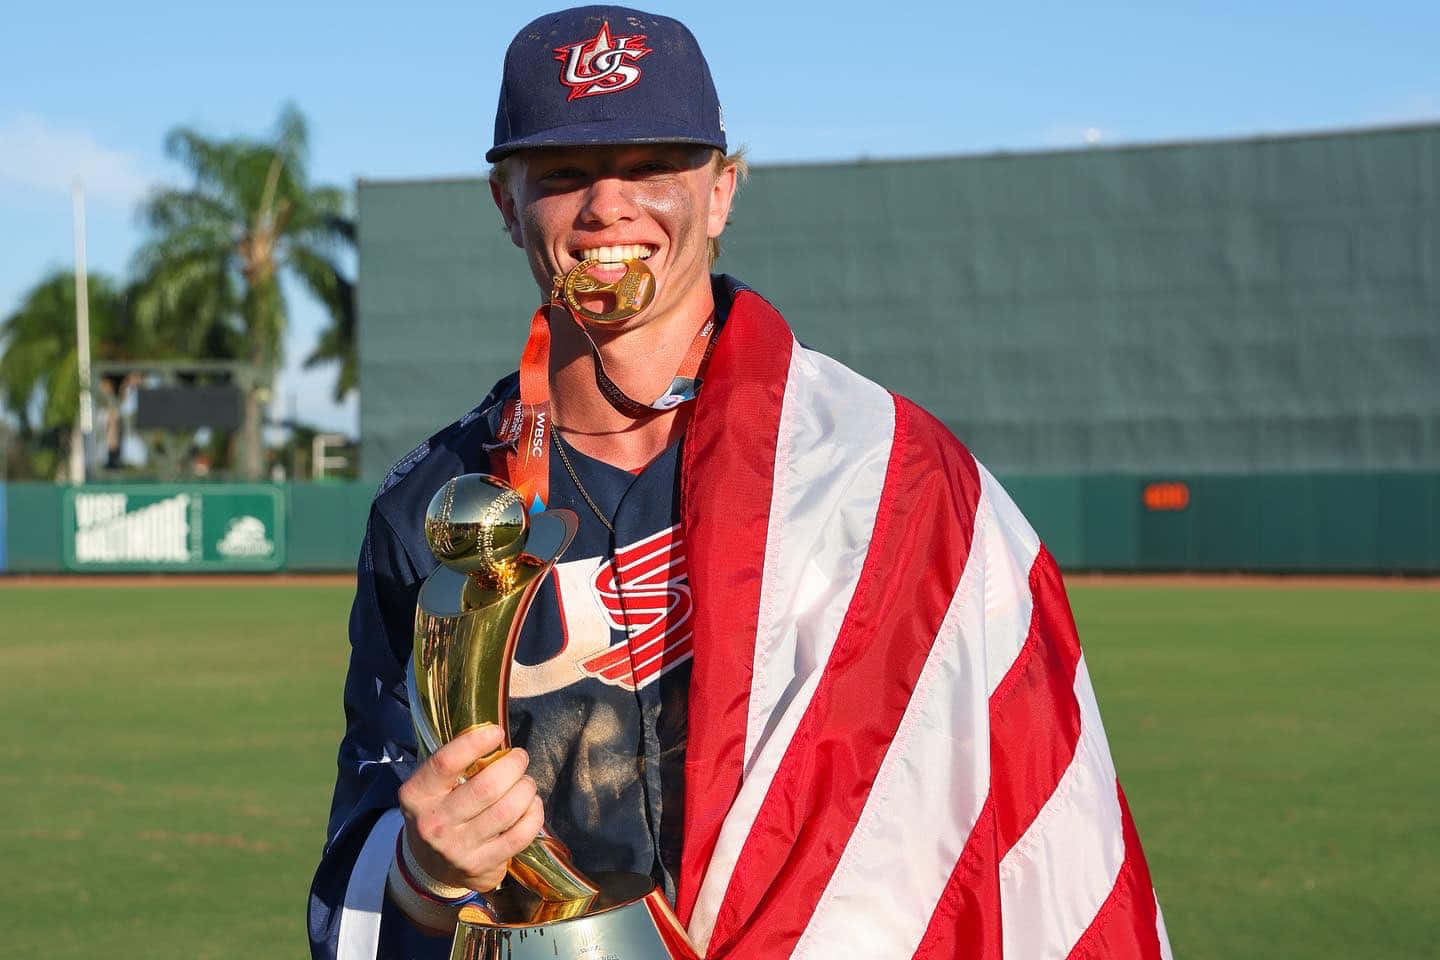 Baseball Player Celebrating Victory With Trophy And Flag Wallpaper